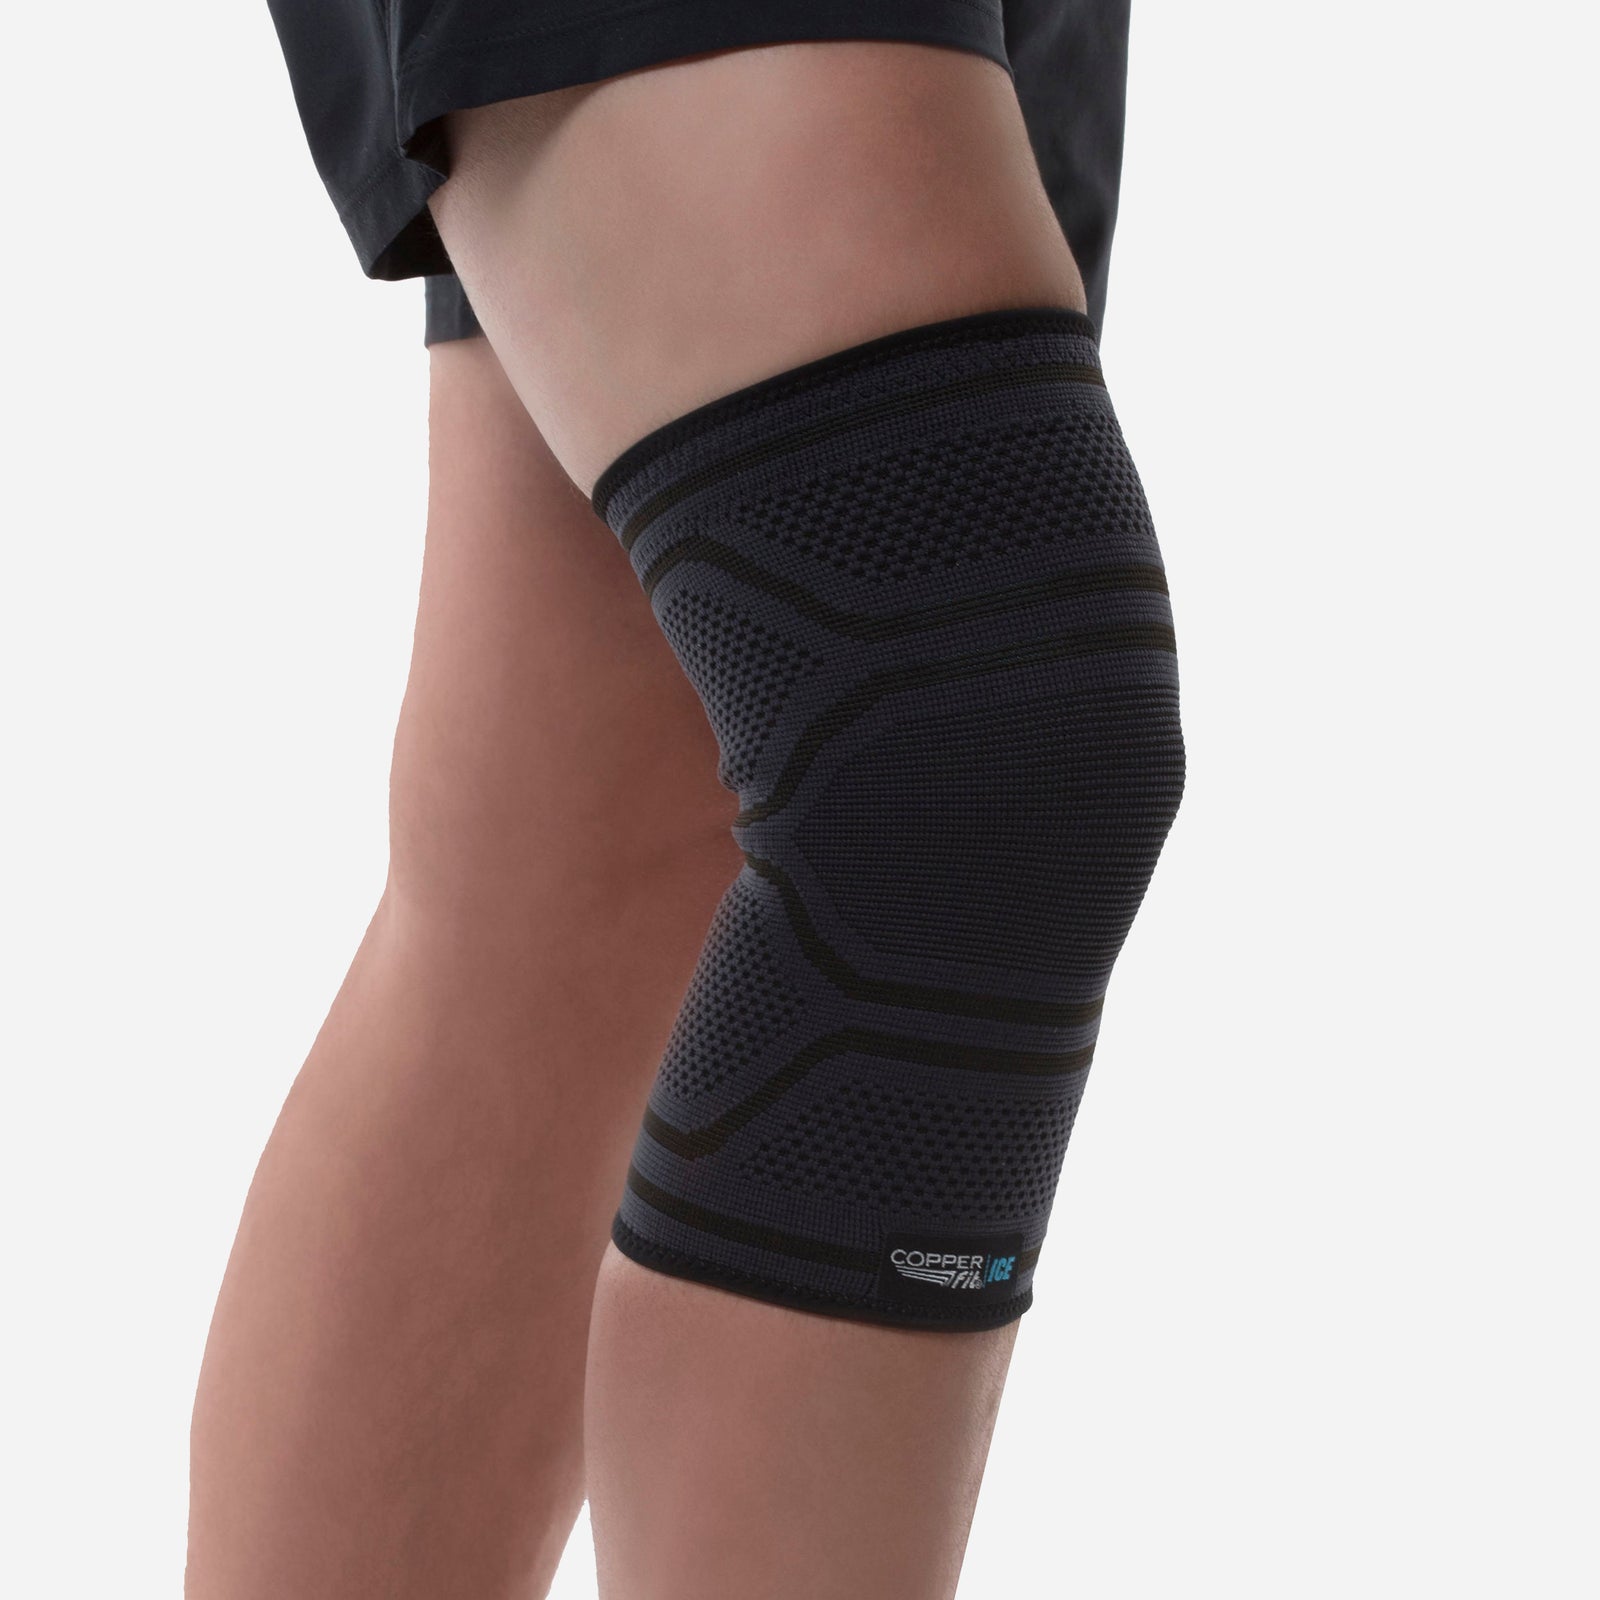 Walk Fit Knee Support Pads